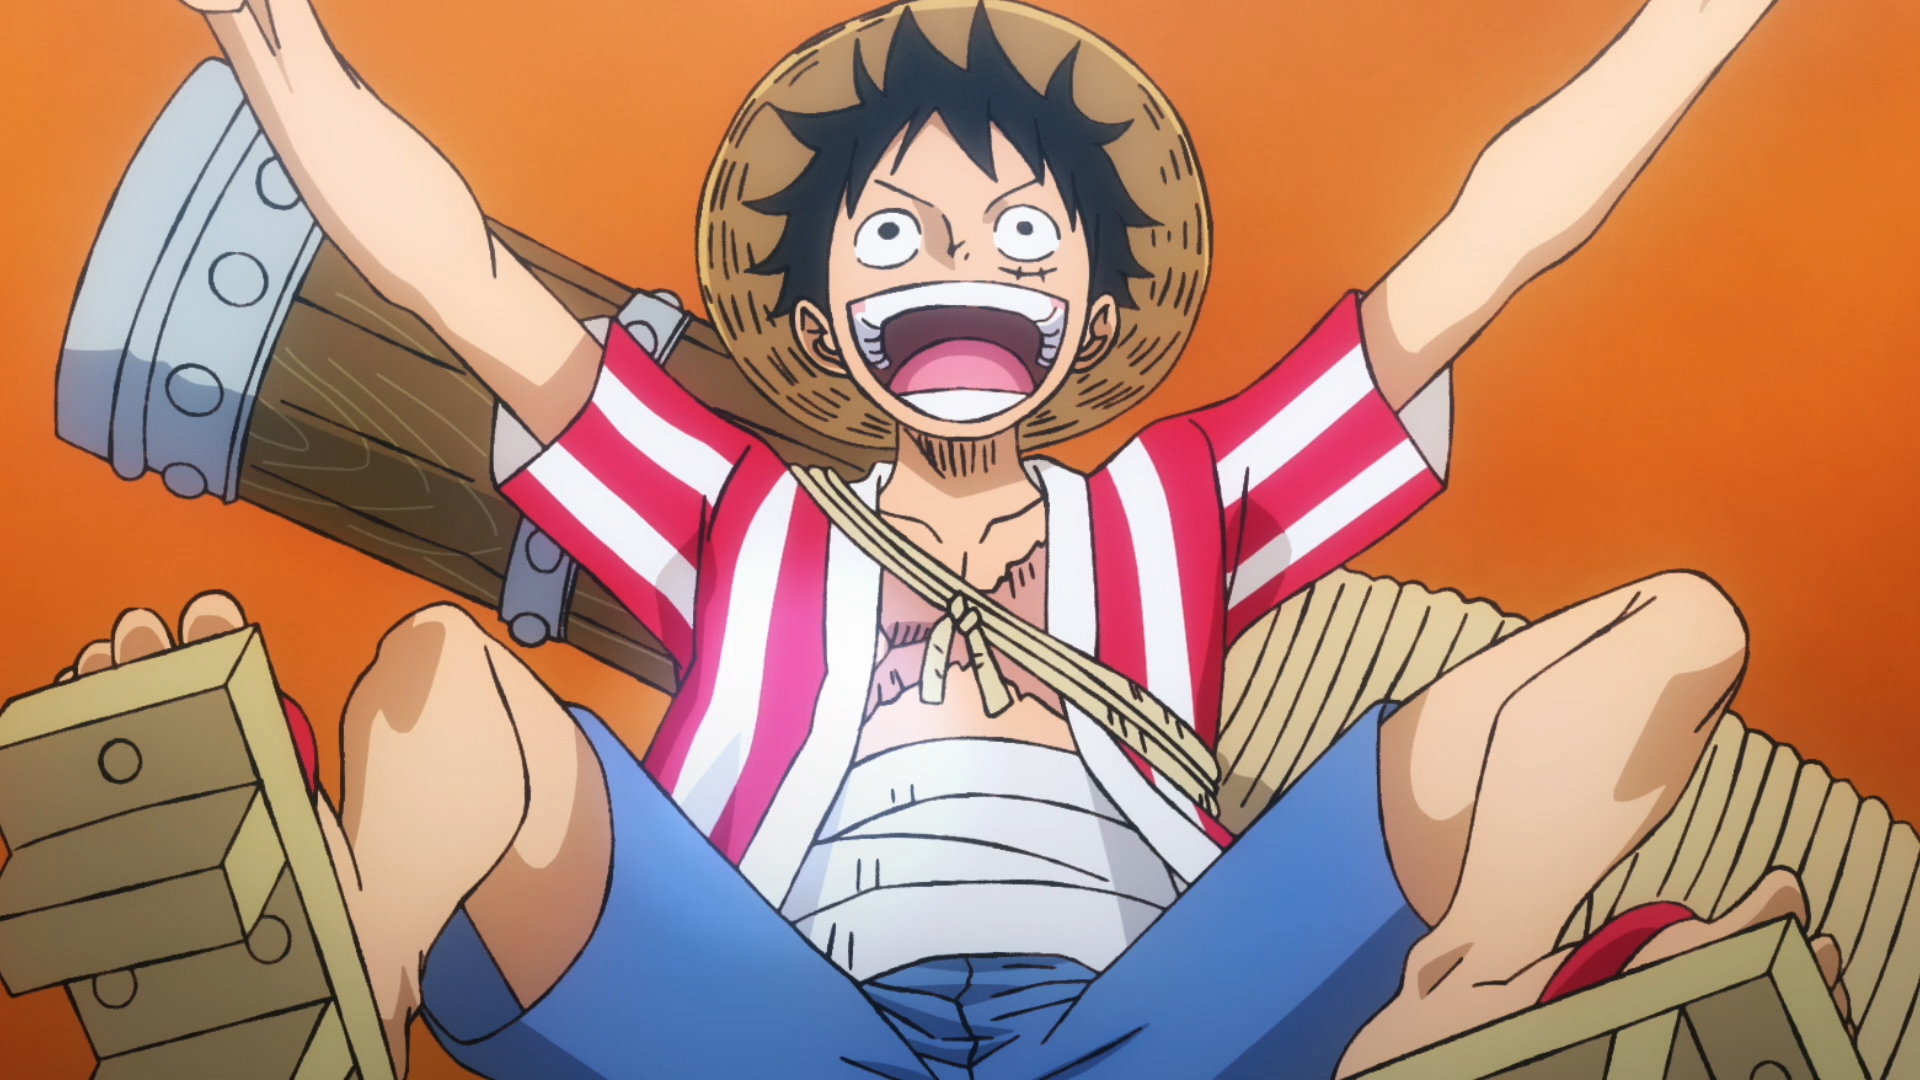 New One Piece Stampede Anime Film Opens in August 2019 - News - Anime News  Network